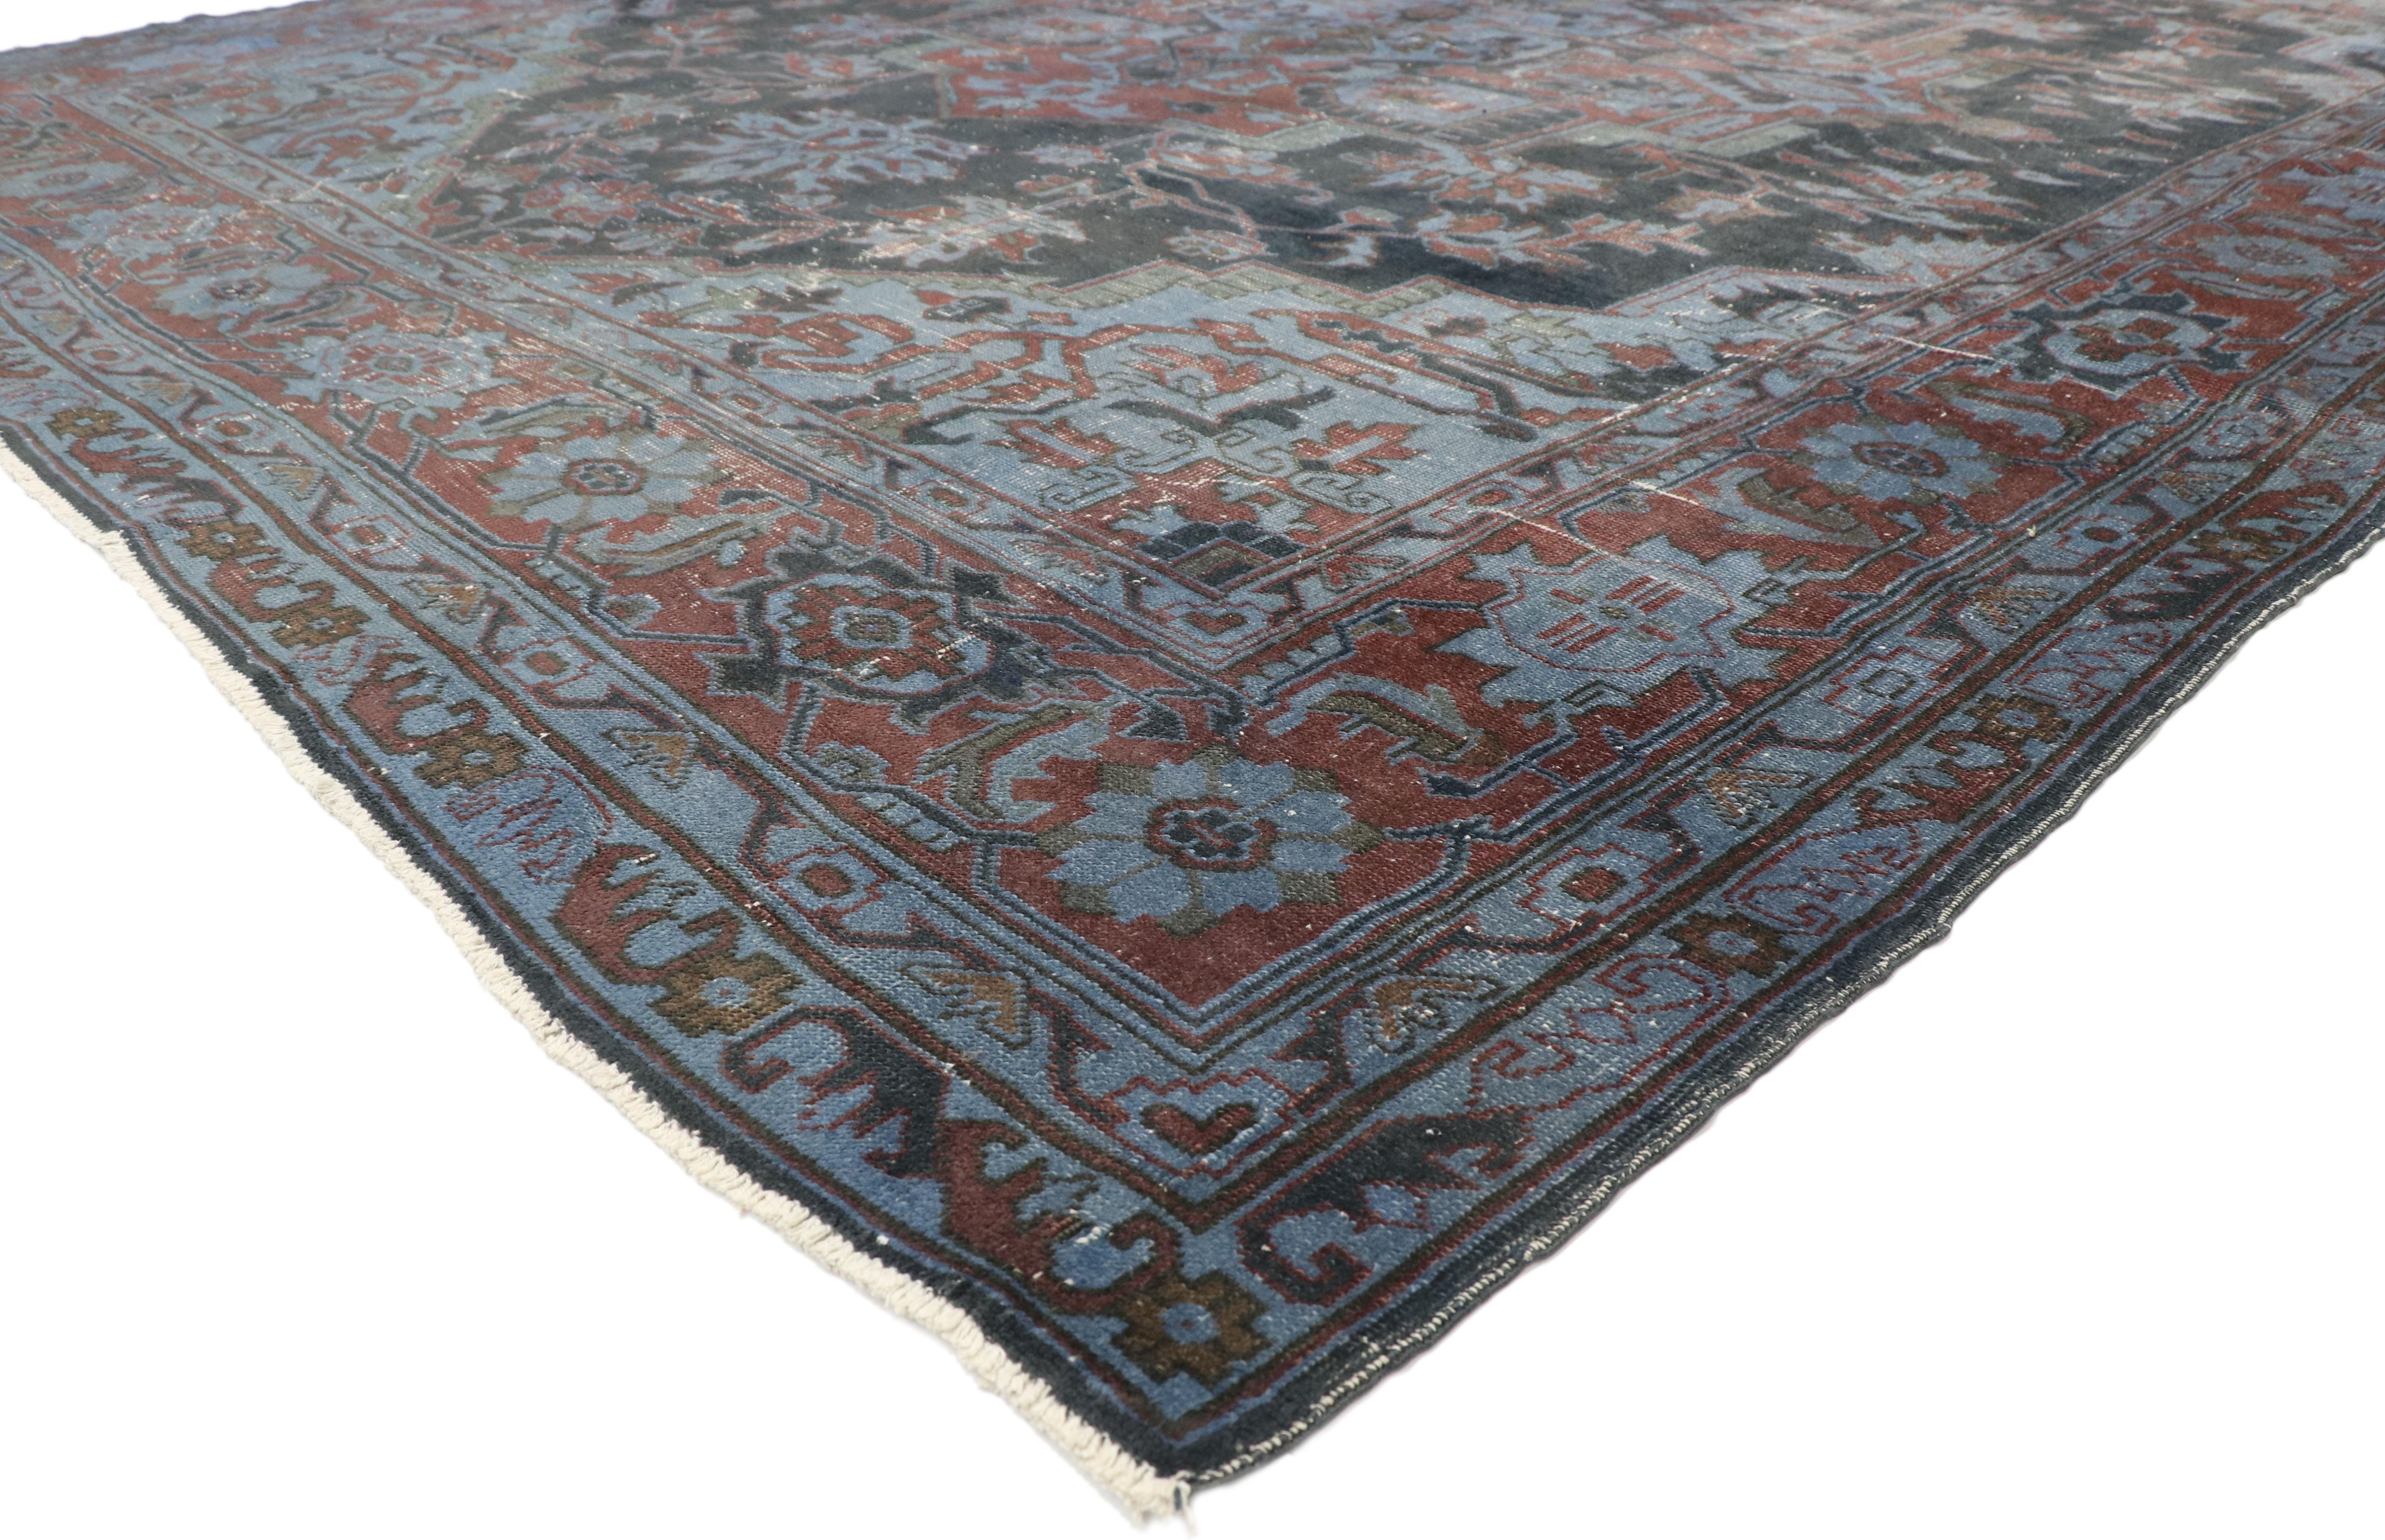 52839 Distressed Antique Turkish Overdyed Rug with Heriz Design and Industrial Style. With a lovingly timeworn appearance and blissful bucolic vibes, this hand knotted wool distressed antique Turkish rug charms with ease and beautifully embodies